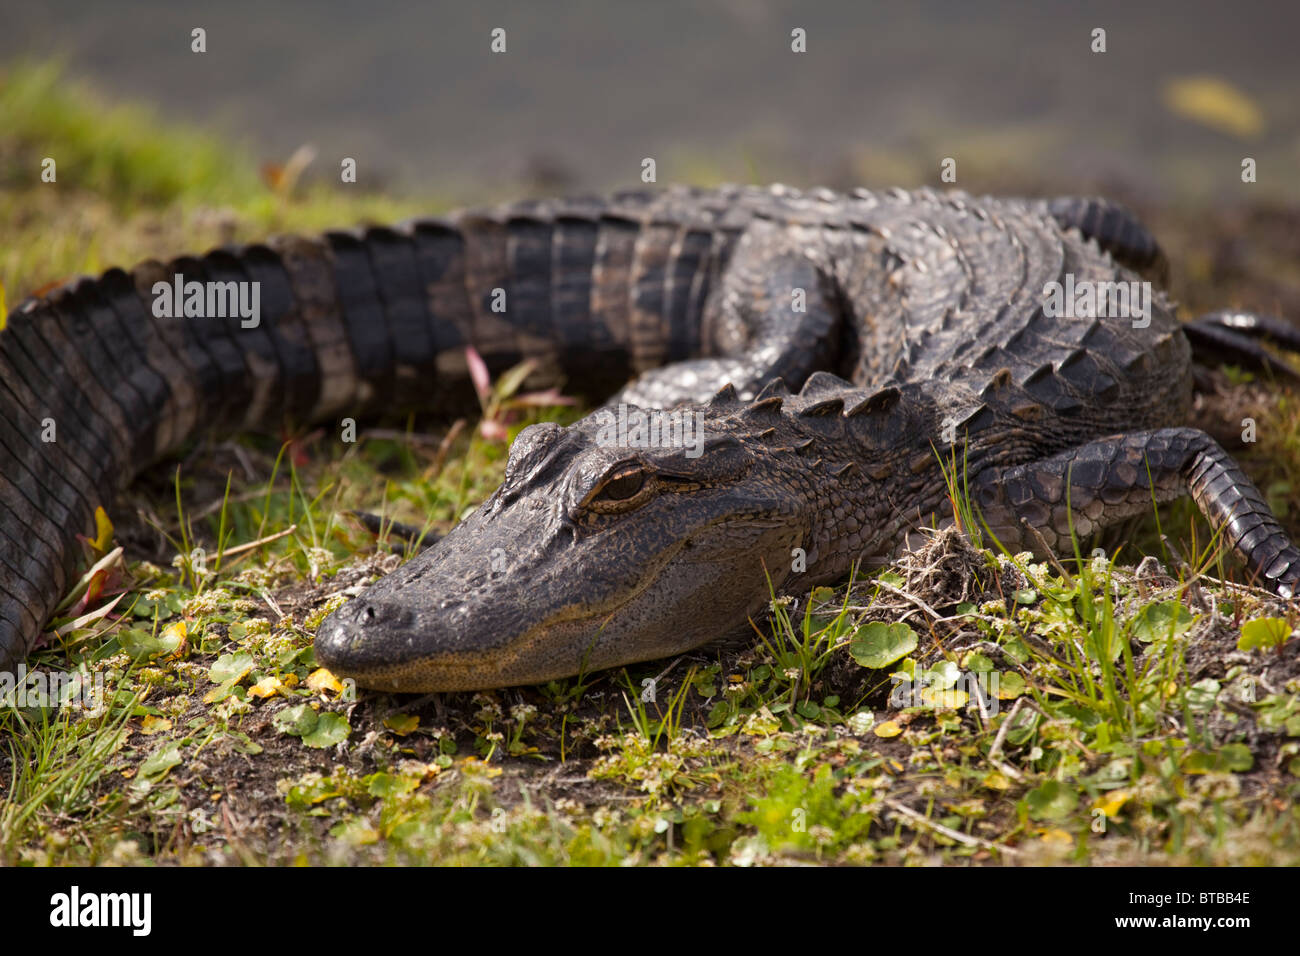 American alligator, Alligator mississippiensis, basking in the sun next to a small pond in Florida Stock Photo